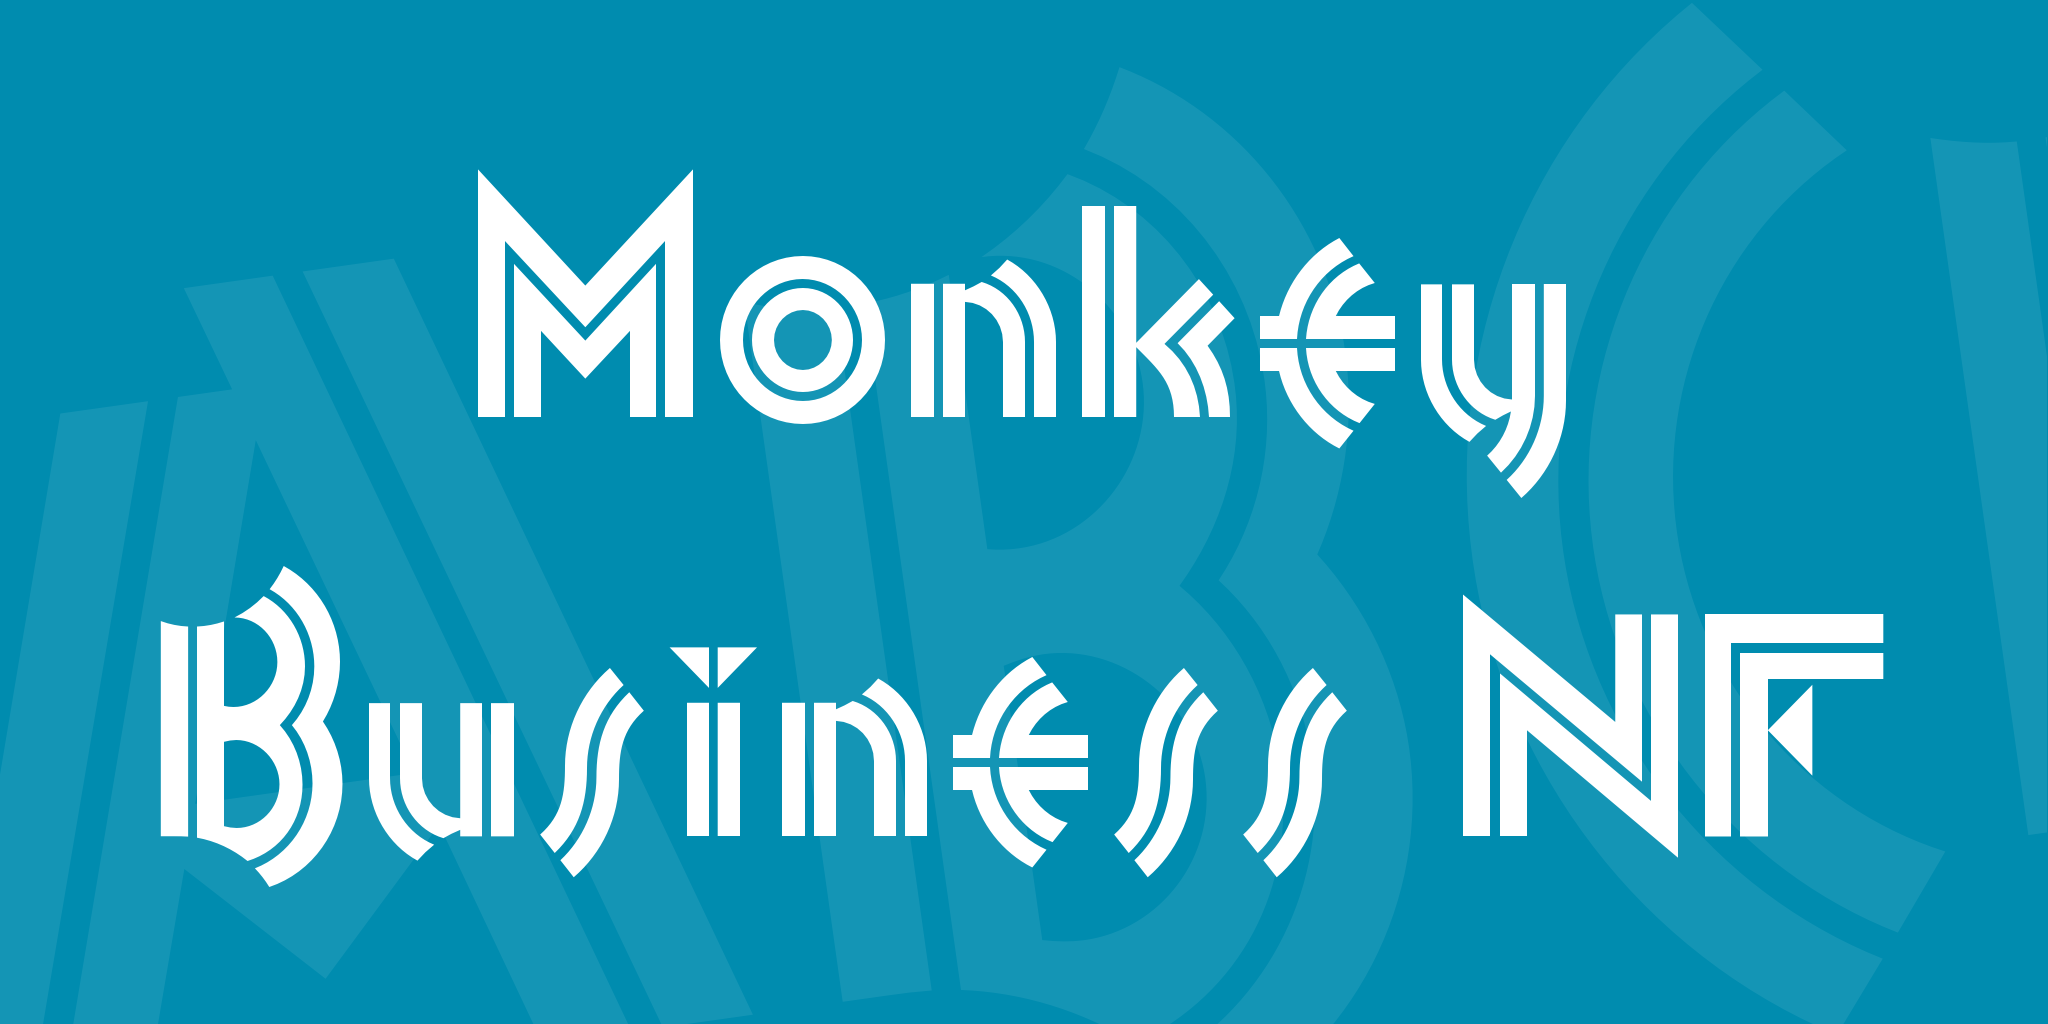 Monkey Business Nf